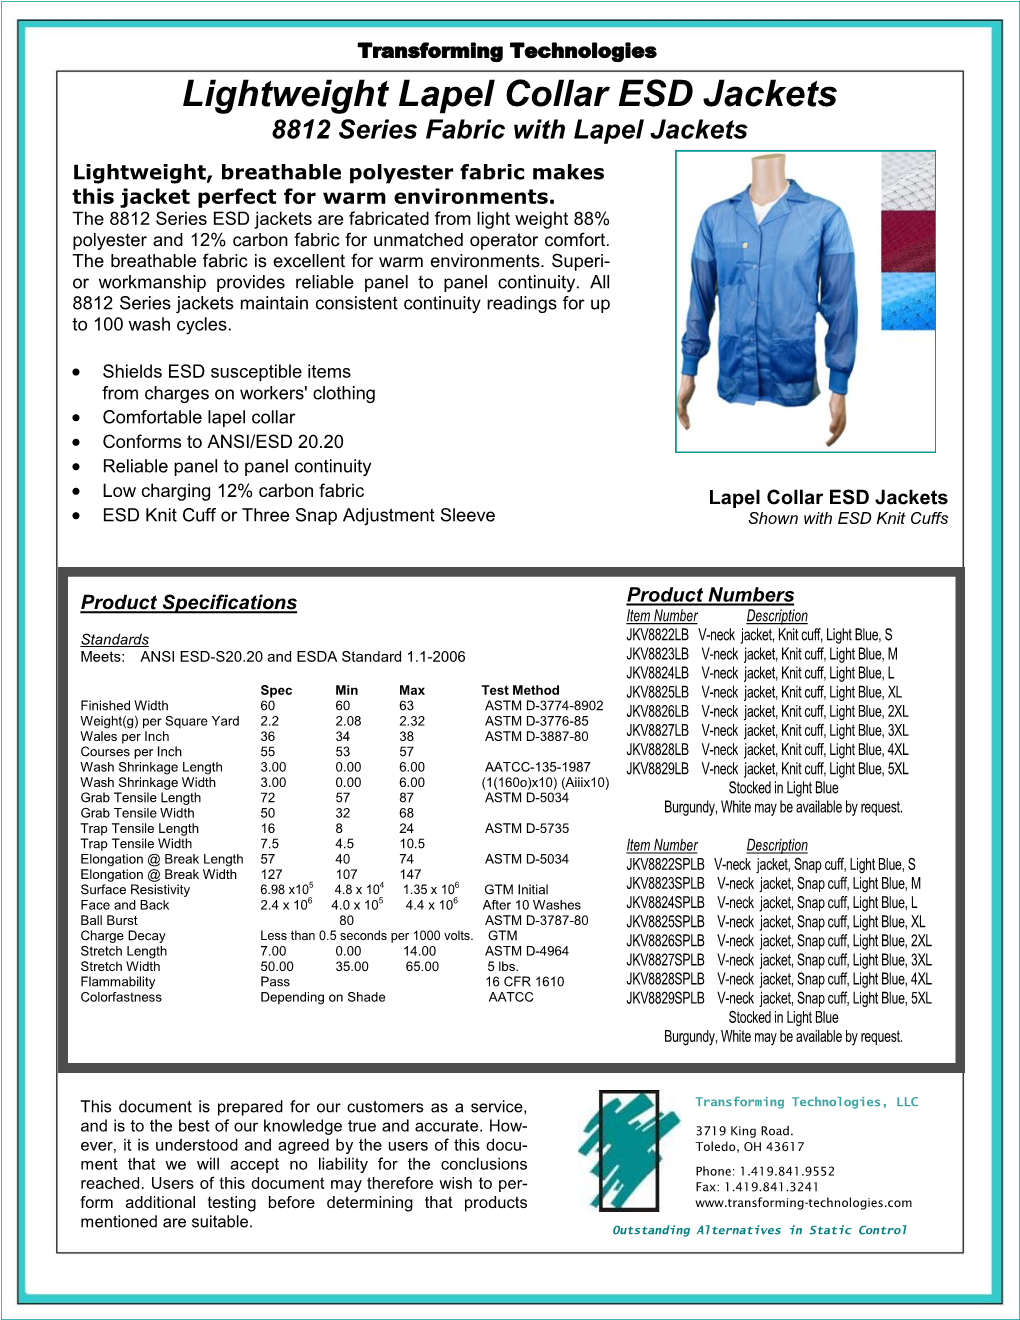 Lightweight Lapel Collar ESD Jackets 8812 Series Fabric with Lapel Jackets Lightweight, Breathable Polyester Fabric Makes This Jacket Perfect for Warm Environments